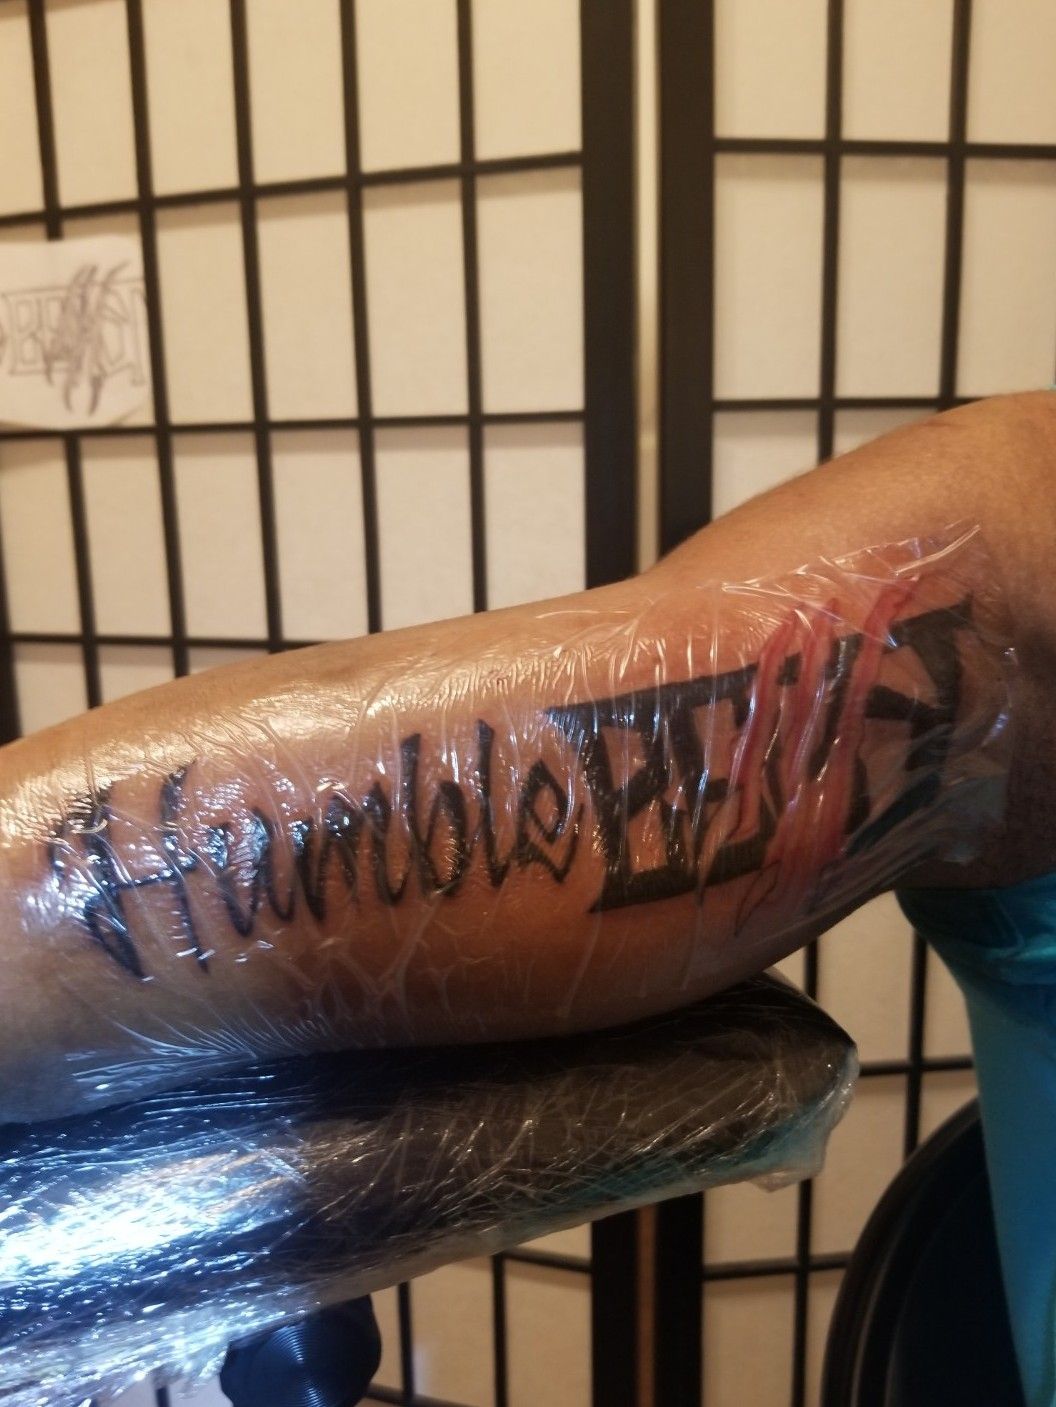 MrBeast on Twitter This guy just got my logo tattooed on himself It  would be hilarious if I changed my logo tomorrow httpstcoRyh63k6irl   Twitter